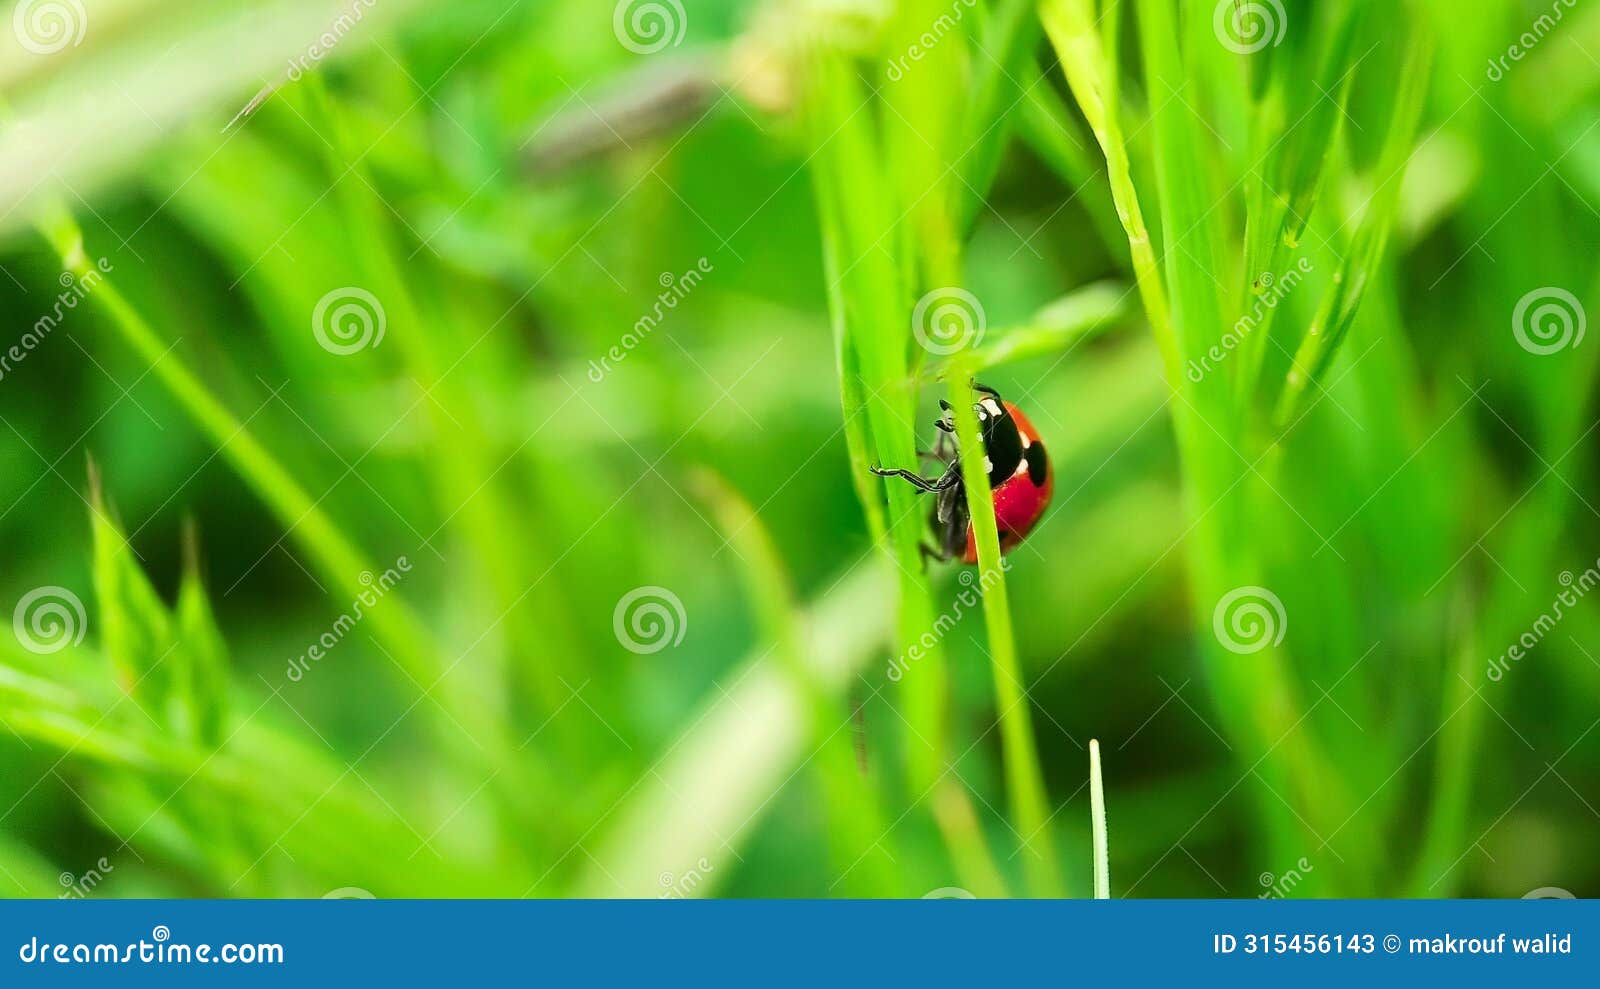 the macro portrait of the ladybug on a green leaf